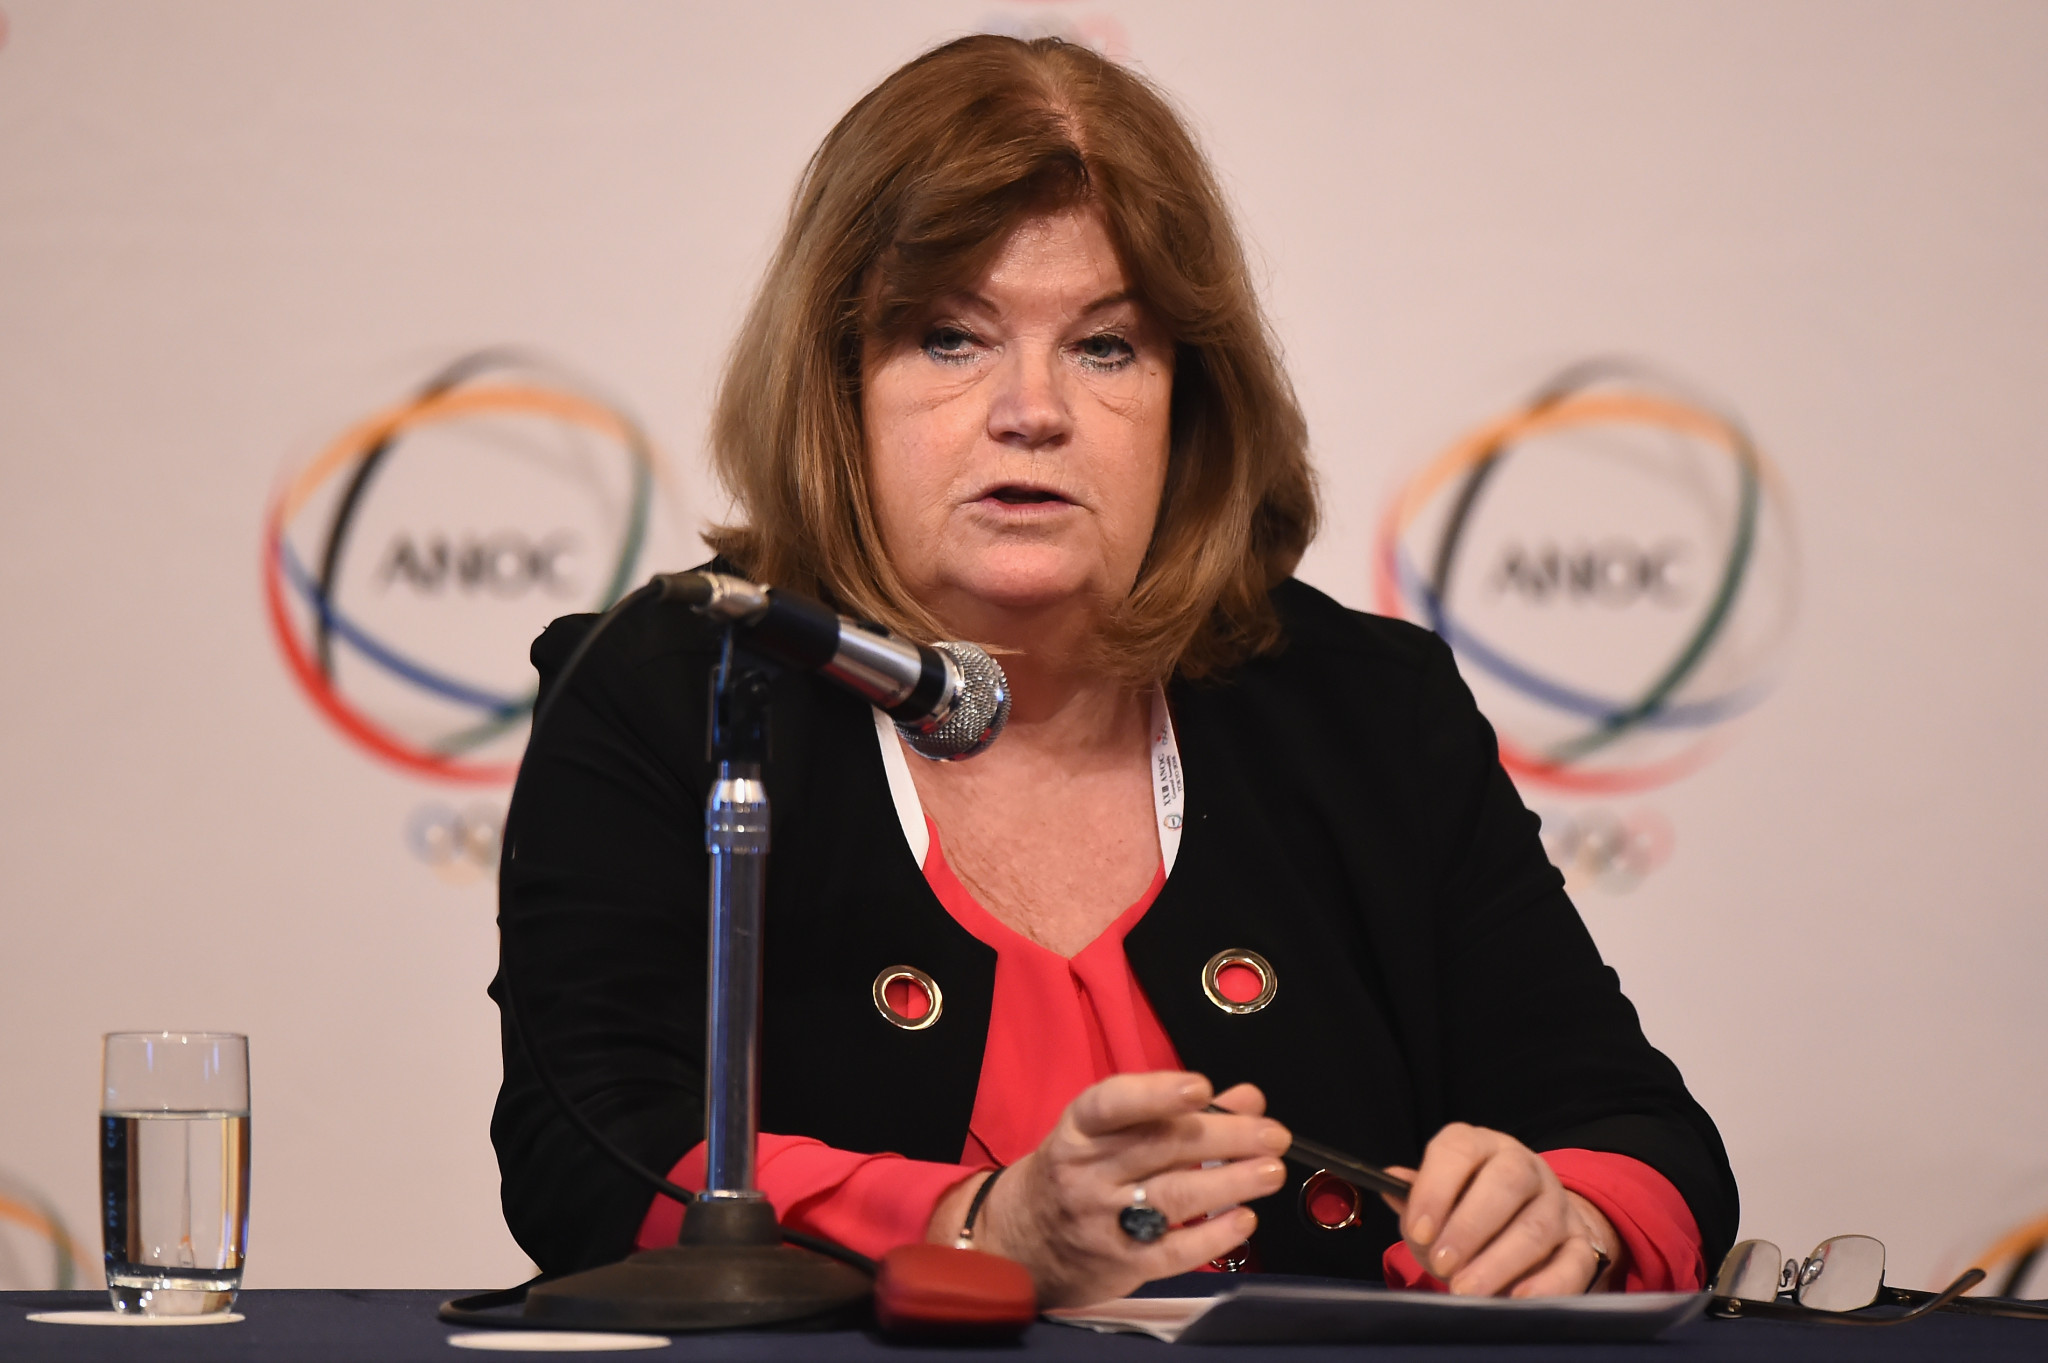 Gunilla Lindberg is the secretary general of the Association of National Olympic Committees ©Getty Images